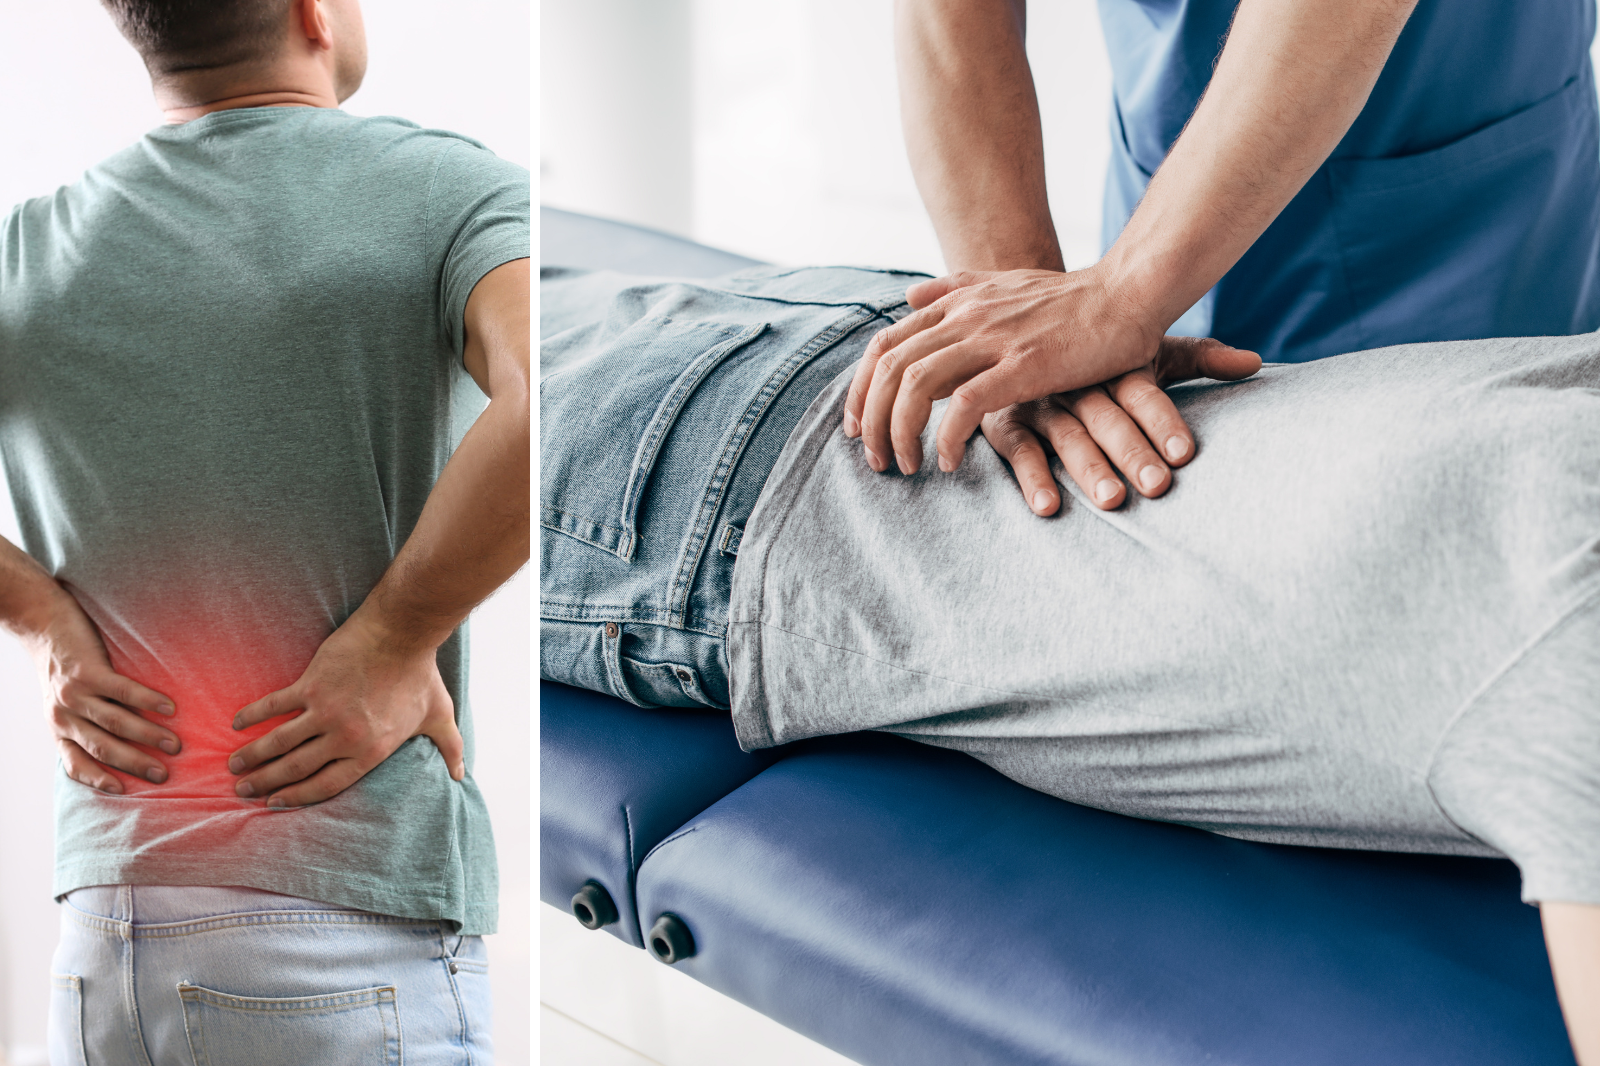 Back Cracking For Back Pain: Is Chiropractic Treatment Effective Or Is It Just A Placebo Effect?